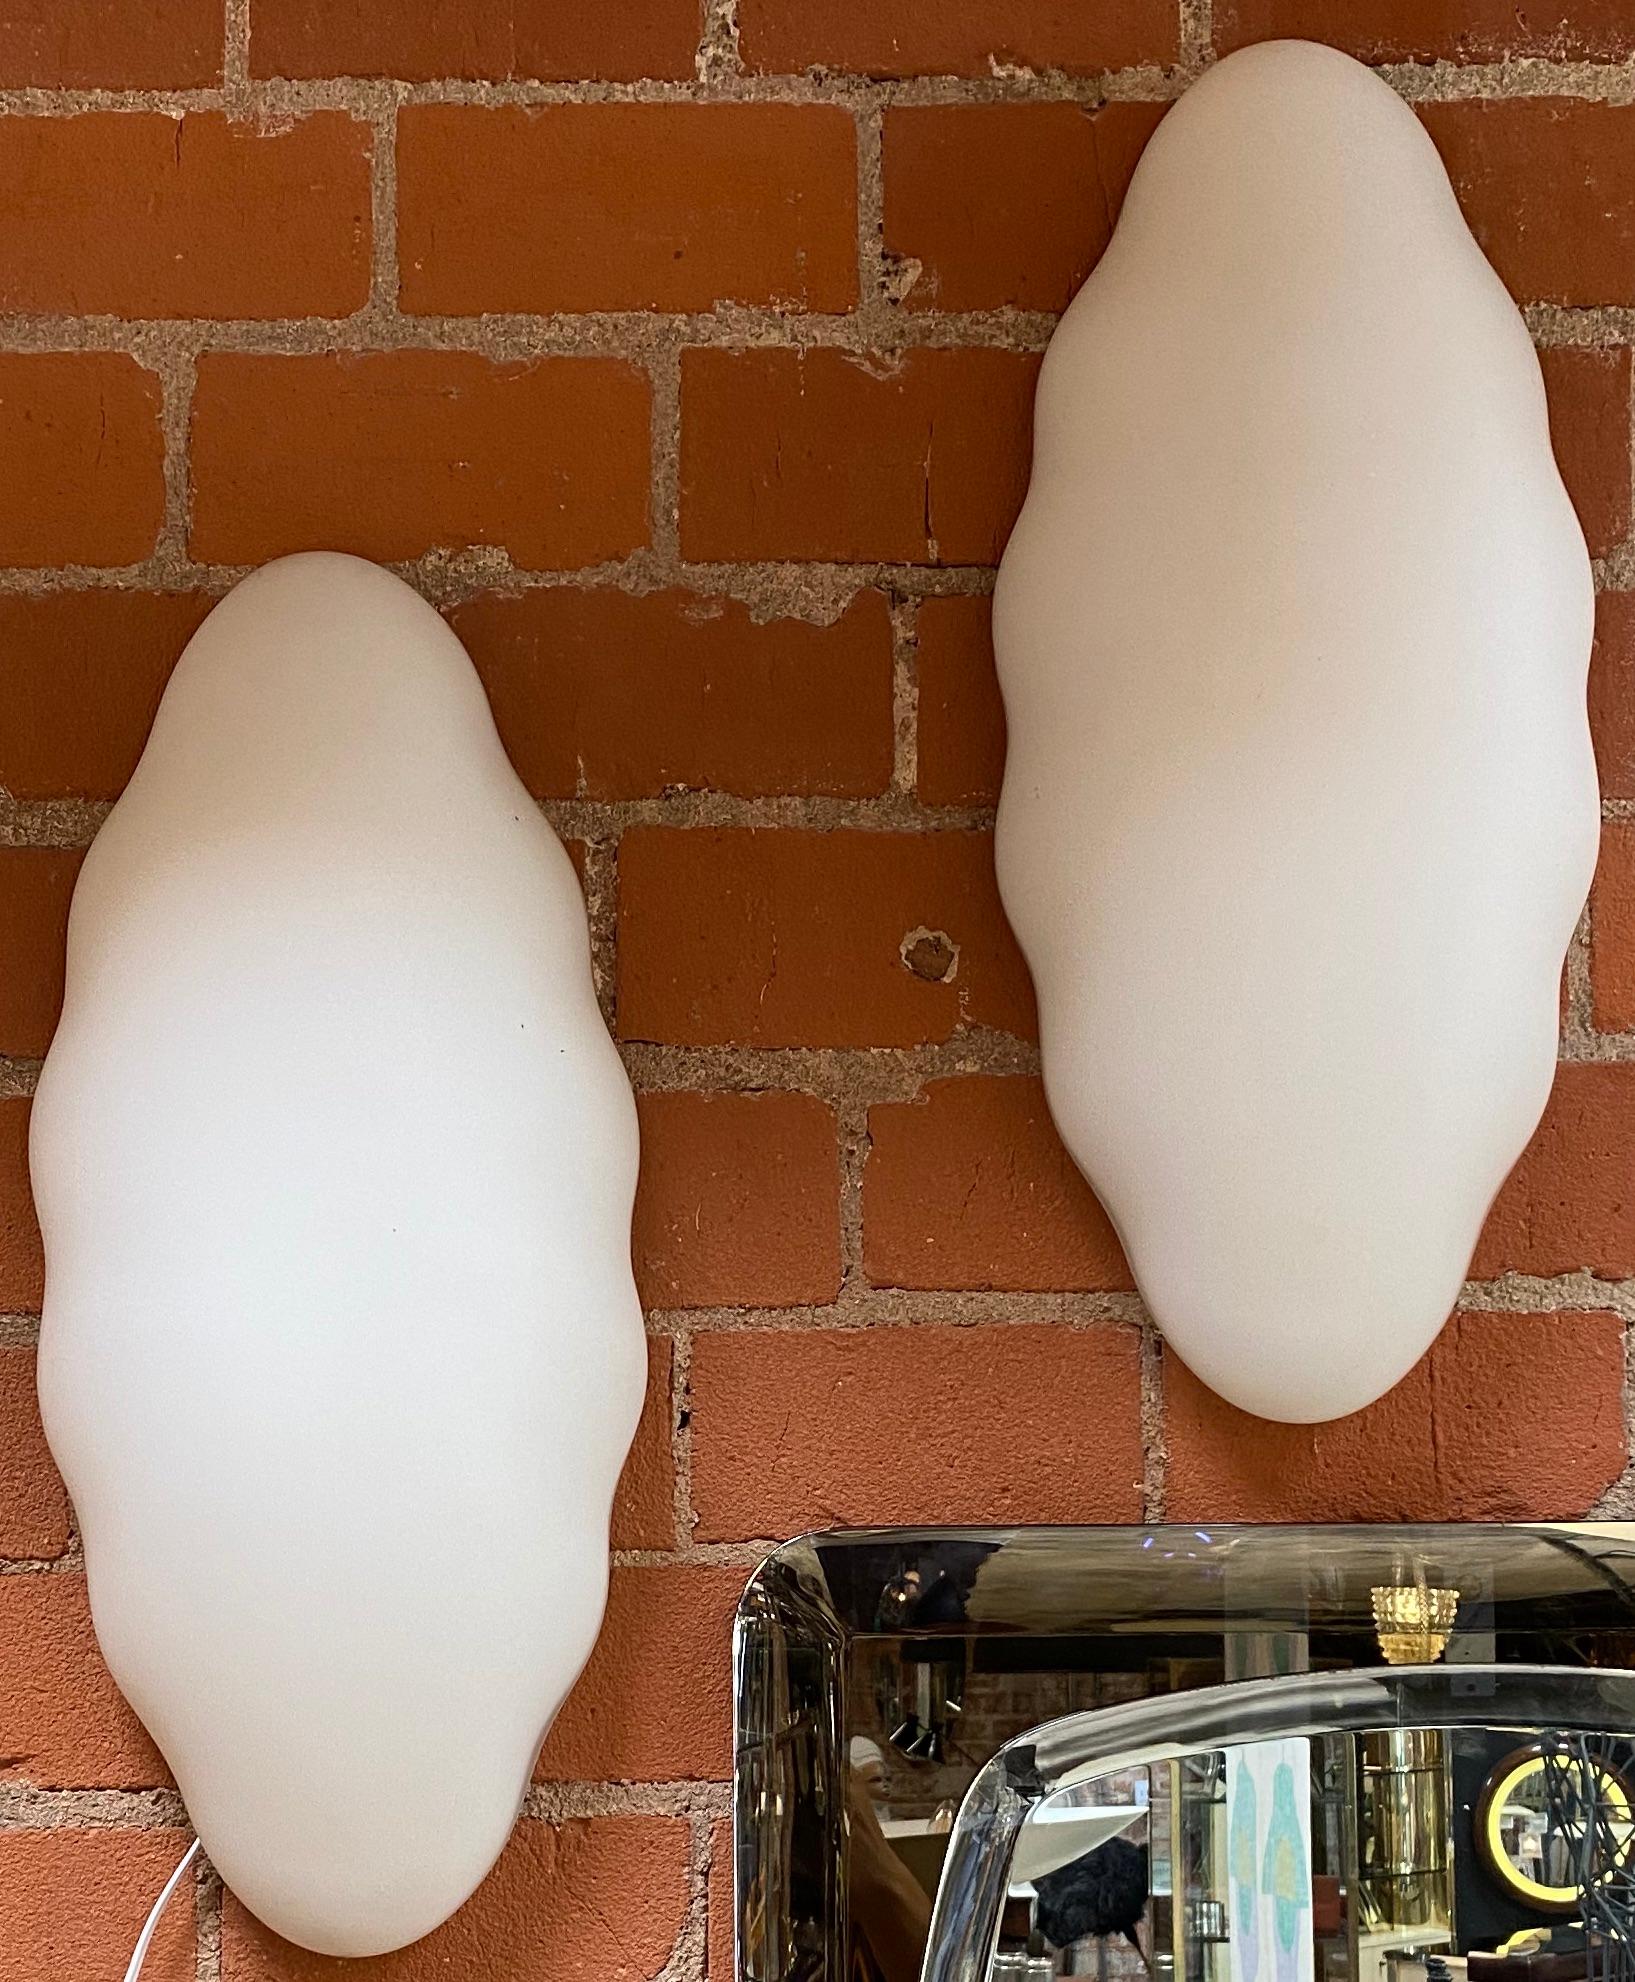 Beautiful pair of two Esperia wall sconces in opaline glass, the sconces are in perfect condition and they have a very particular design that would enrich any Mid-Century Modern environment.
Very nice typically and striking minimalistic midcentury